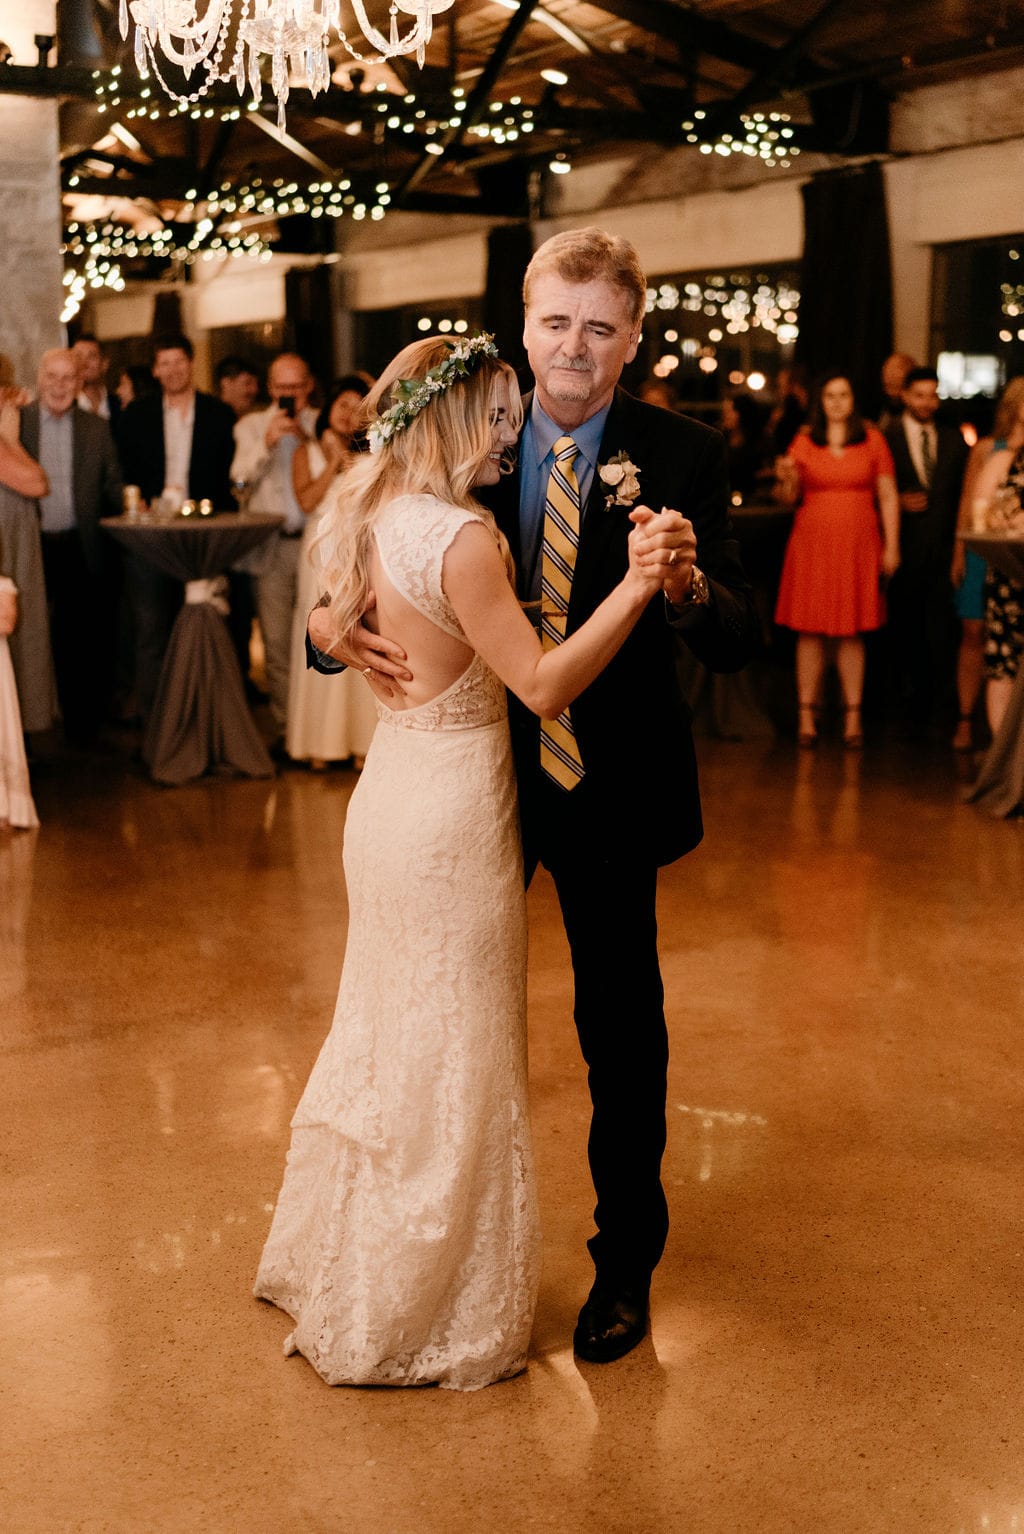 Father Daughter Dance between bride and groom at hickory street annex wedding reception in Deep ellum